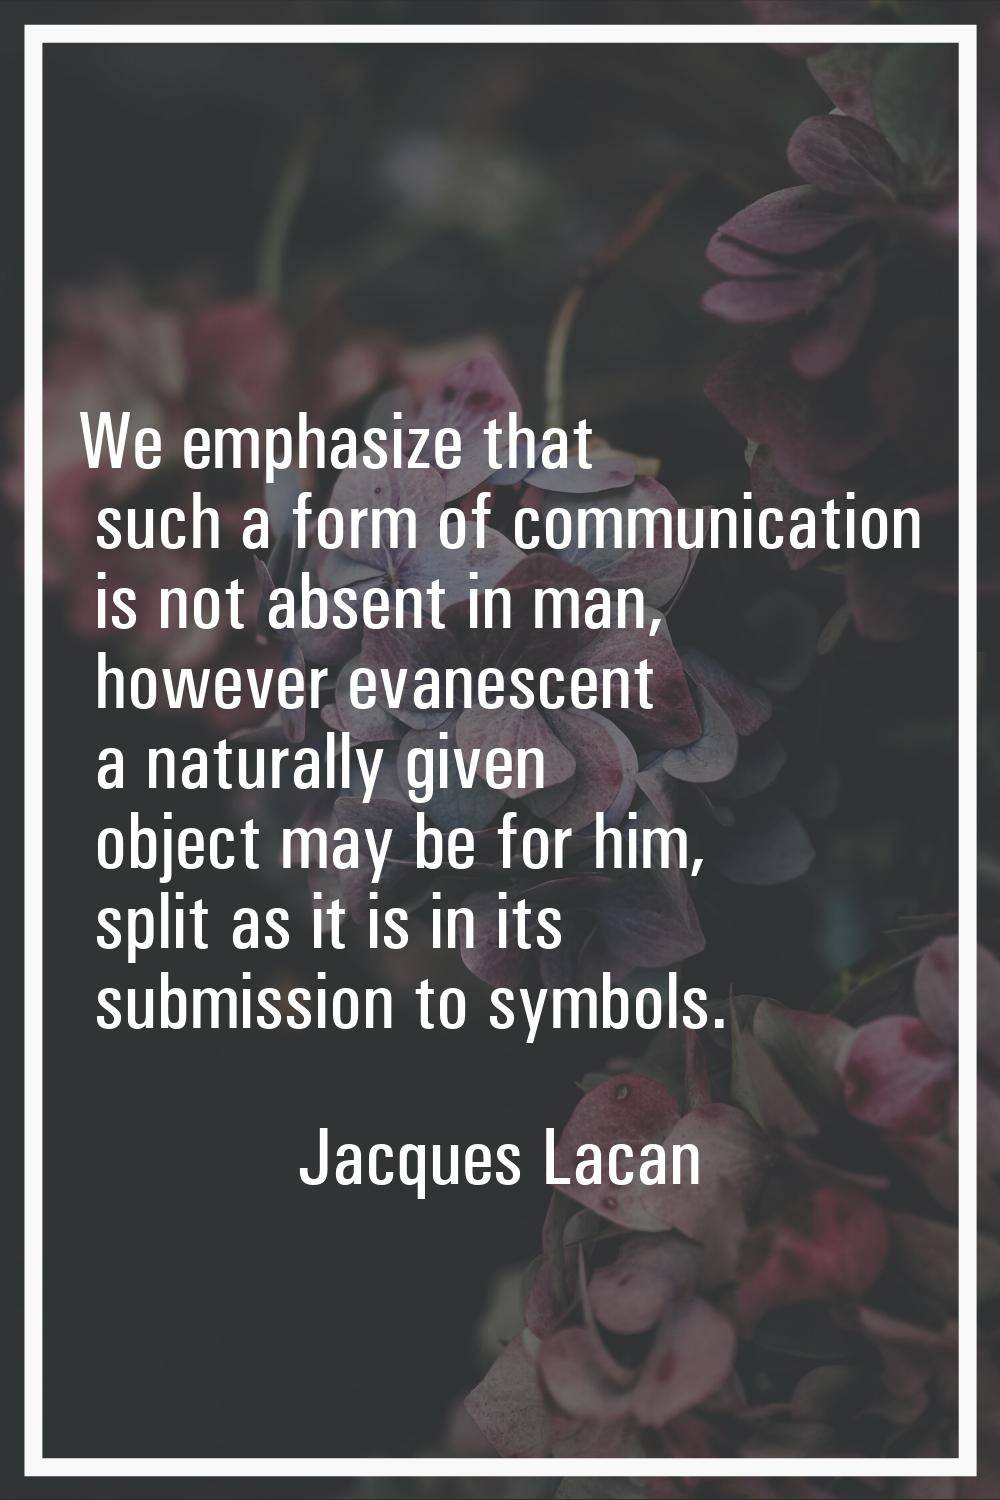 We emphasize that such a form of communication is not absent in man, however evanescent a naturally